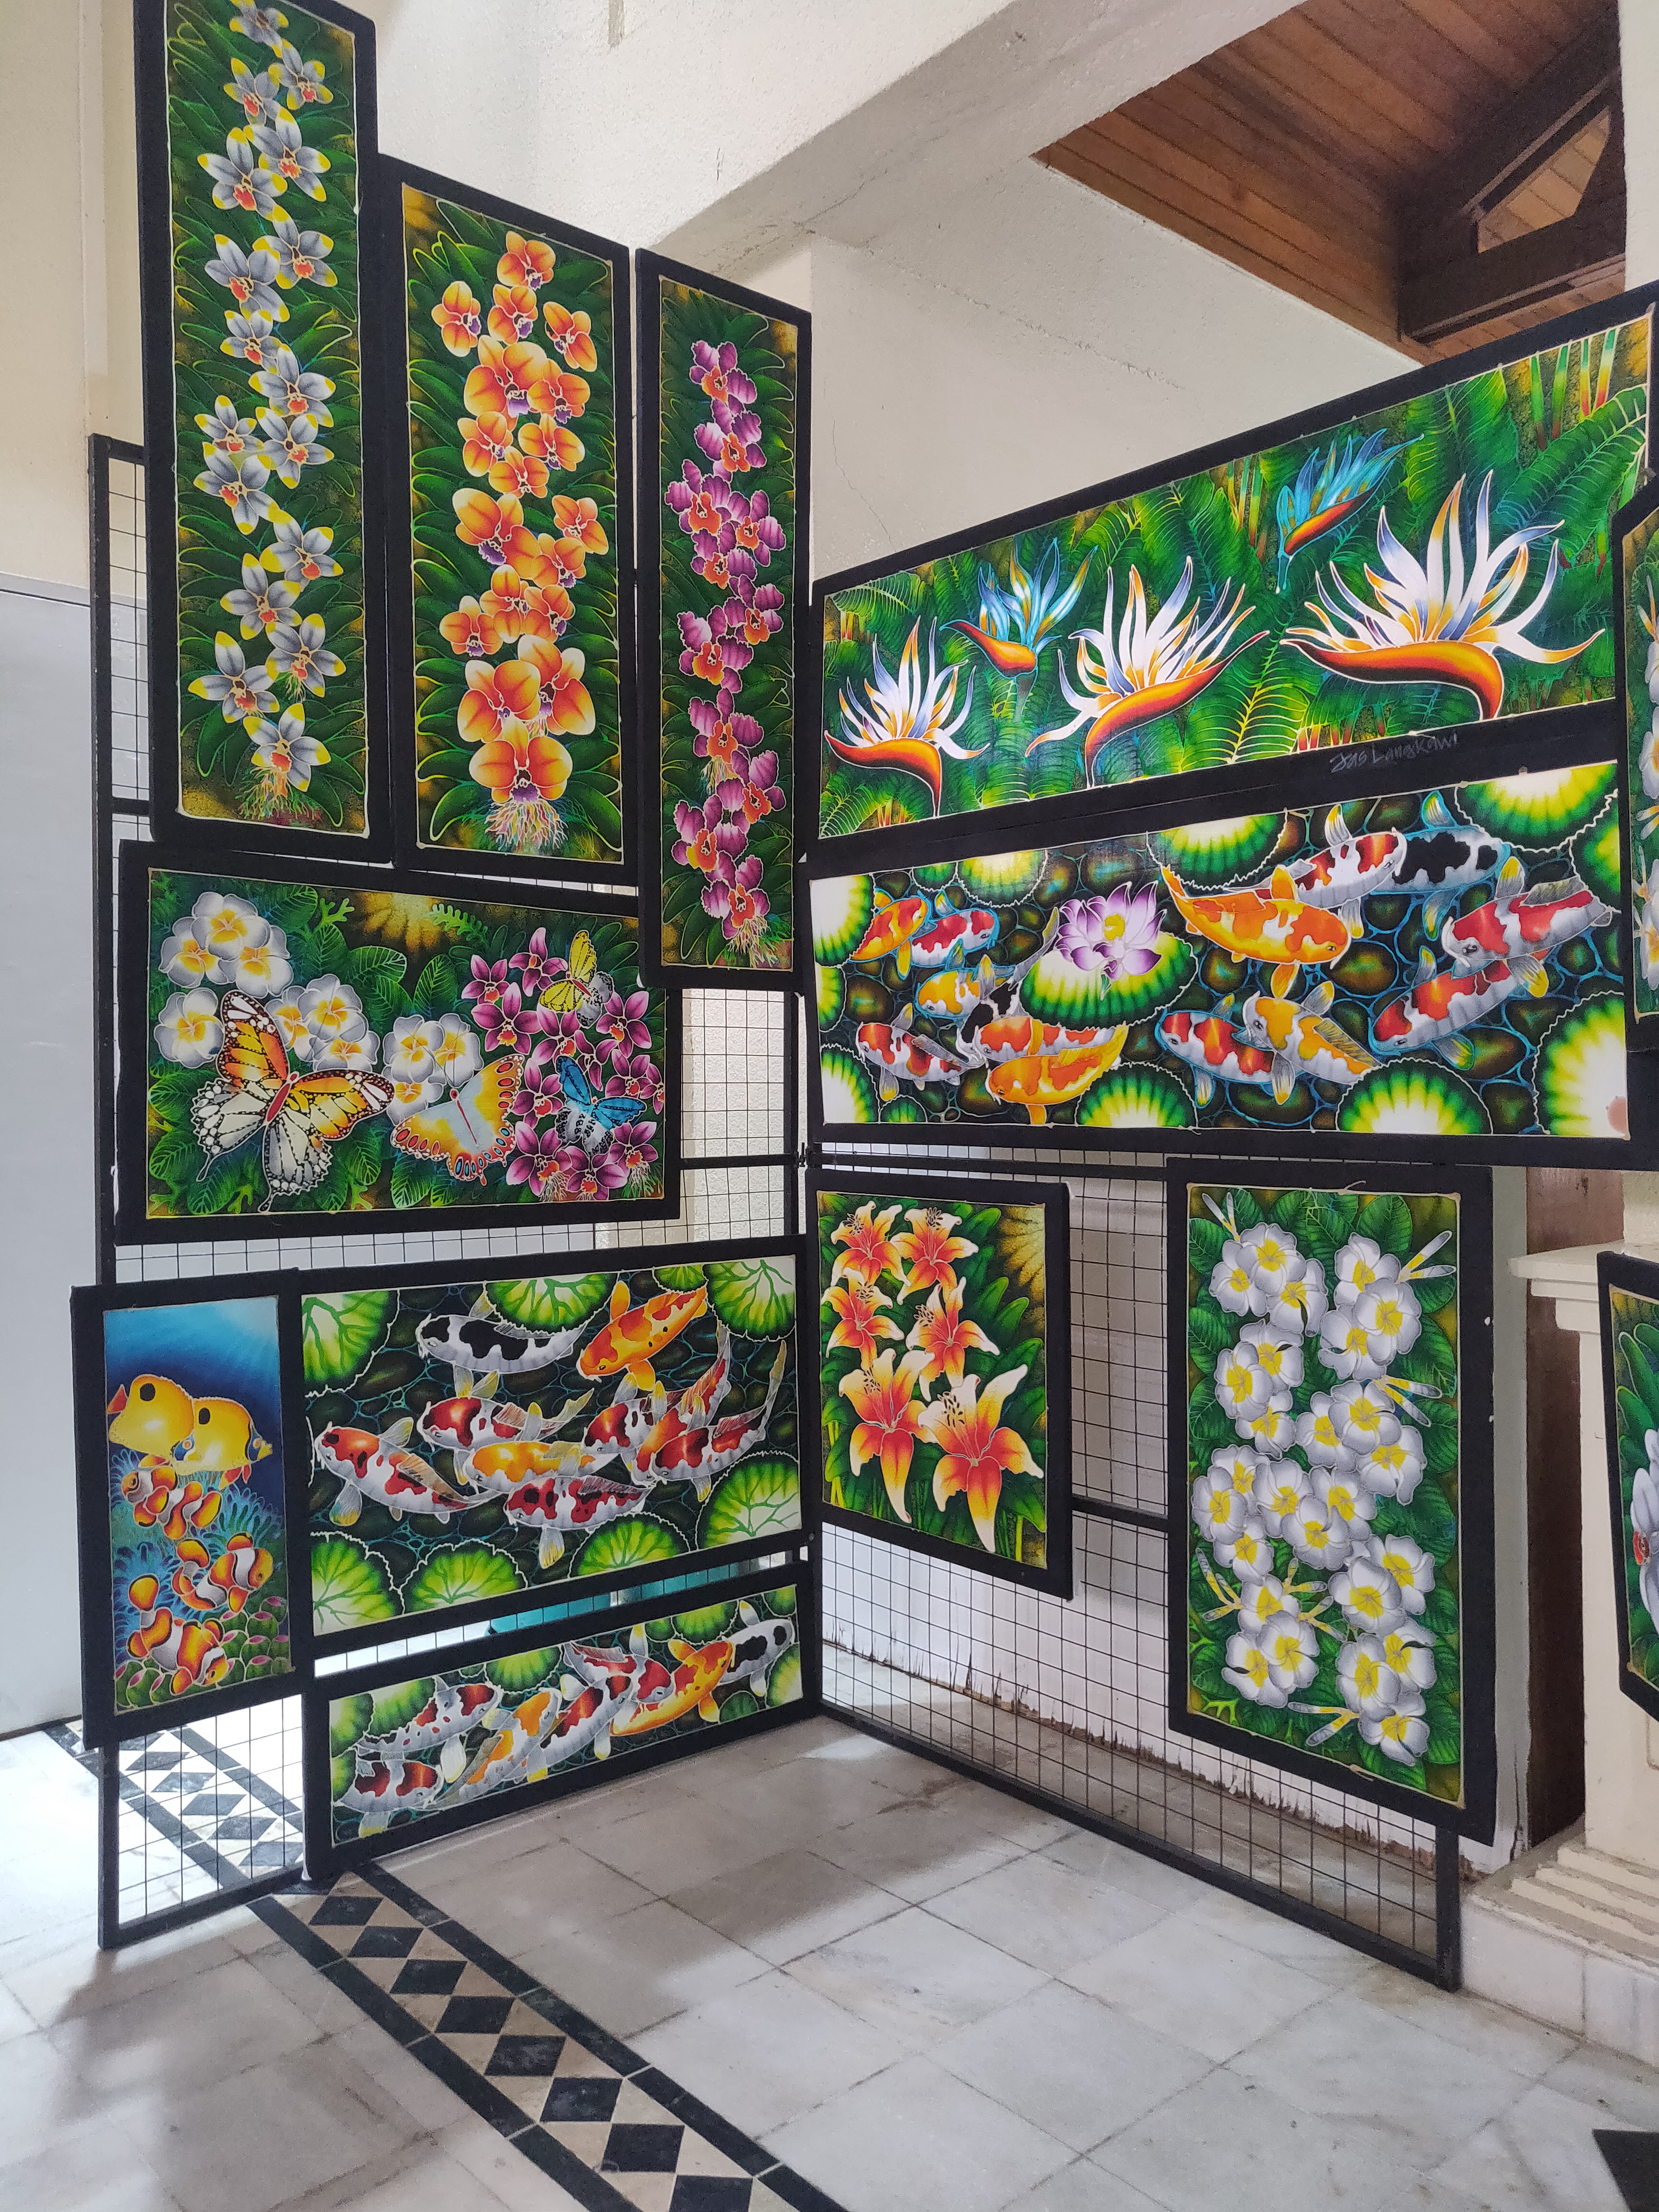 CNY 2020 – Day 19 – Langkawi Cultural Craft Complex